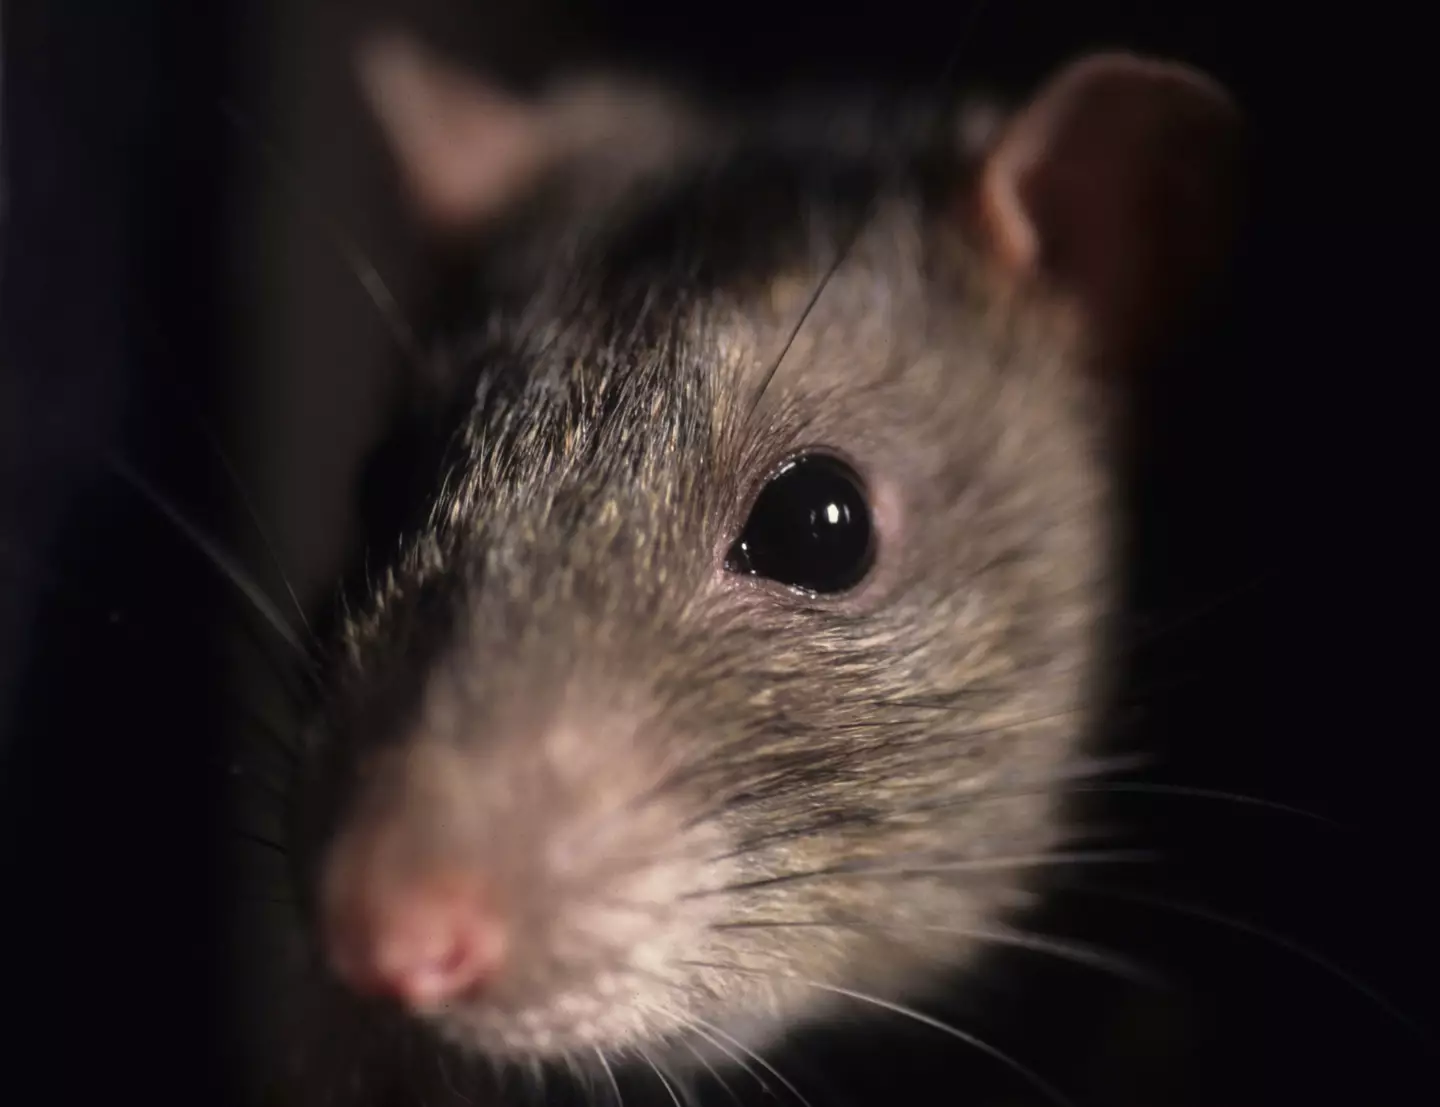 These fellas are getting resistant to common types of rat poisons.